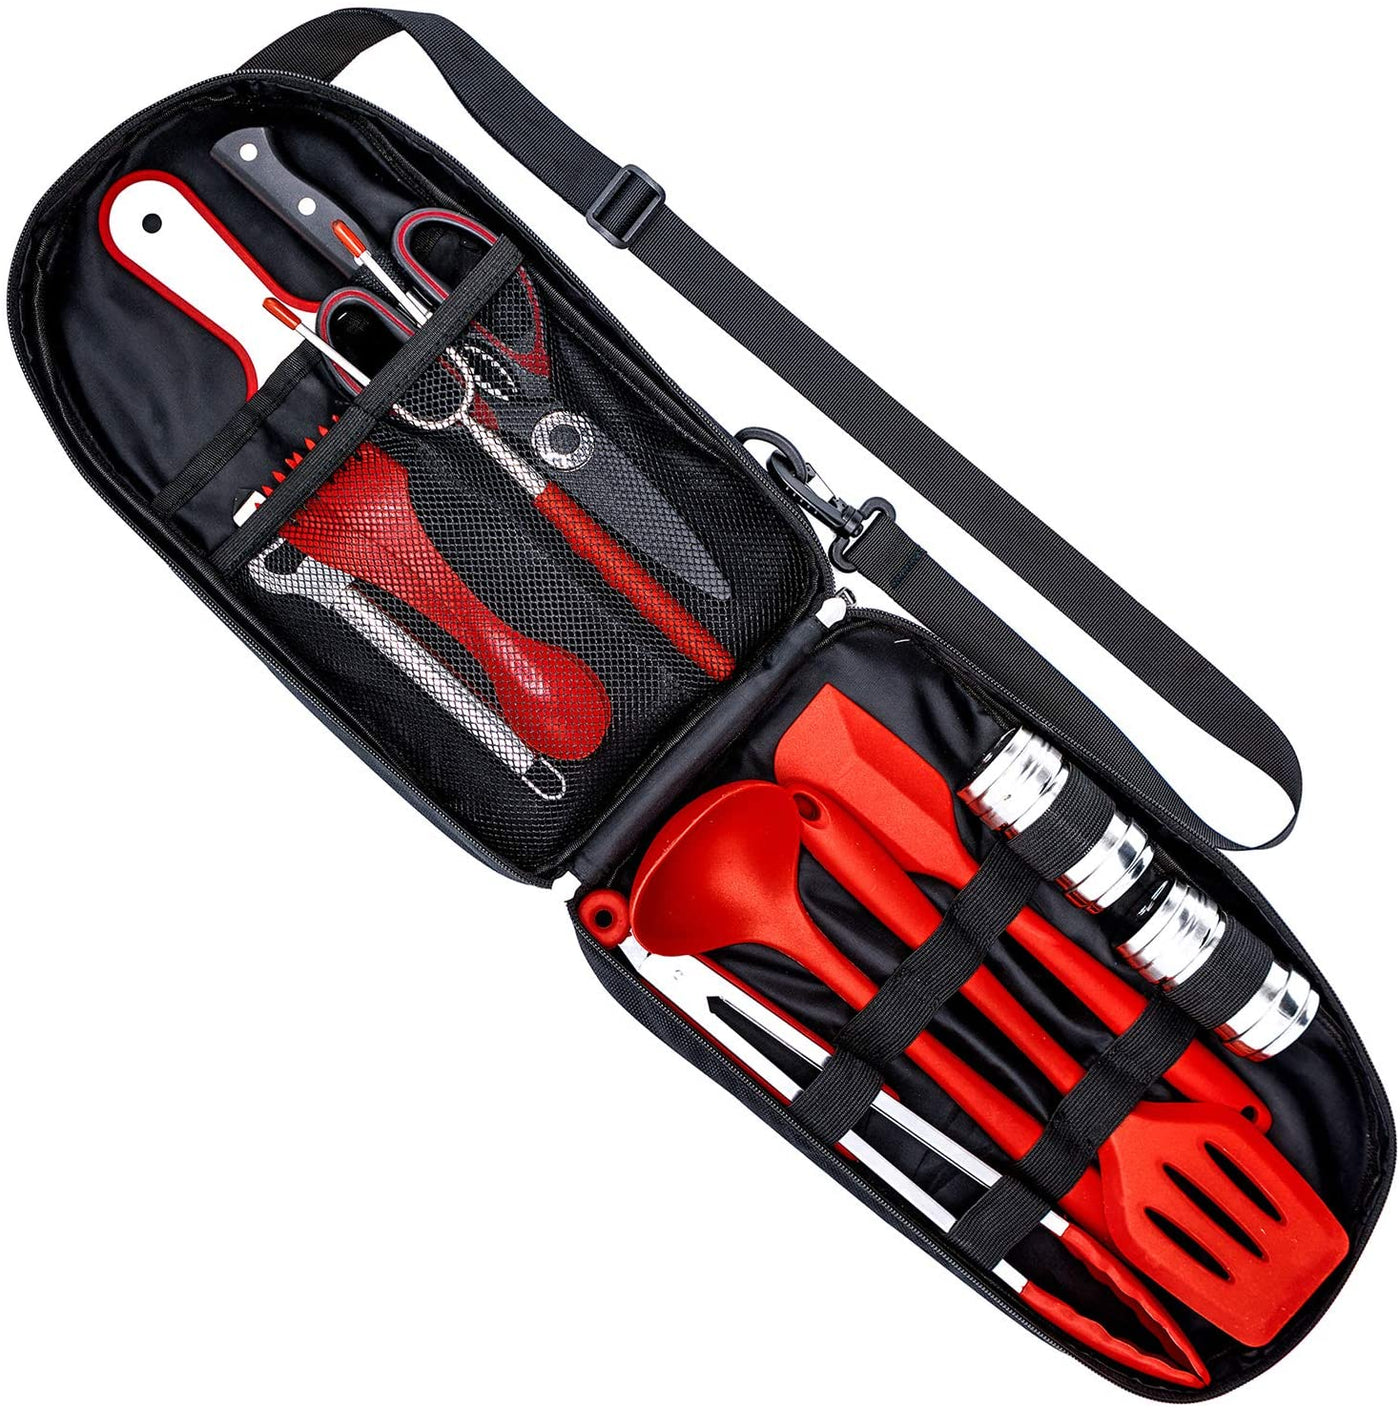 Cooking & Grilling Utensil Organizer Travel Set & Carry Case, Portable Silicone Camping Utensils & Kitchen Accessories, Cookware Equipment Kit and Chopping Board, Scissors & Camp Knife, Grill Supplies